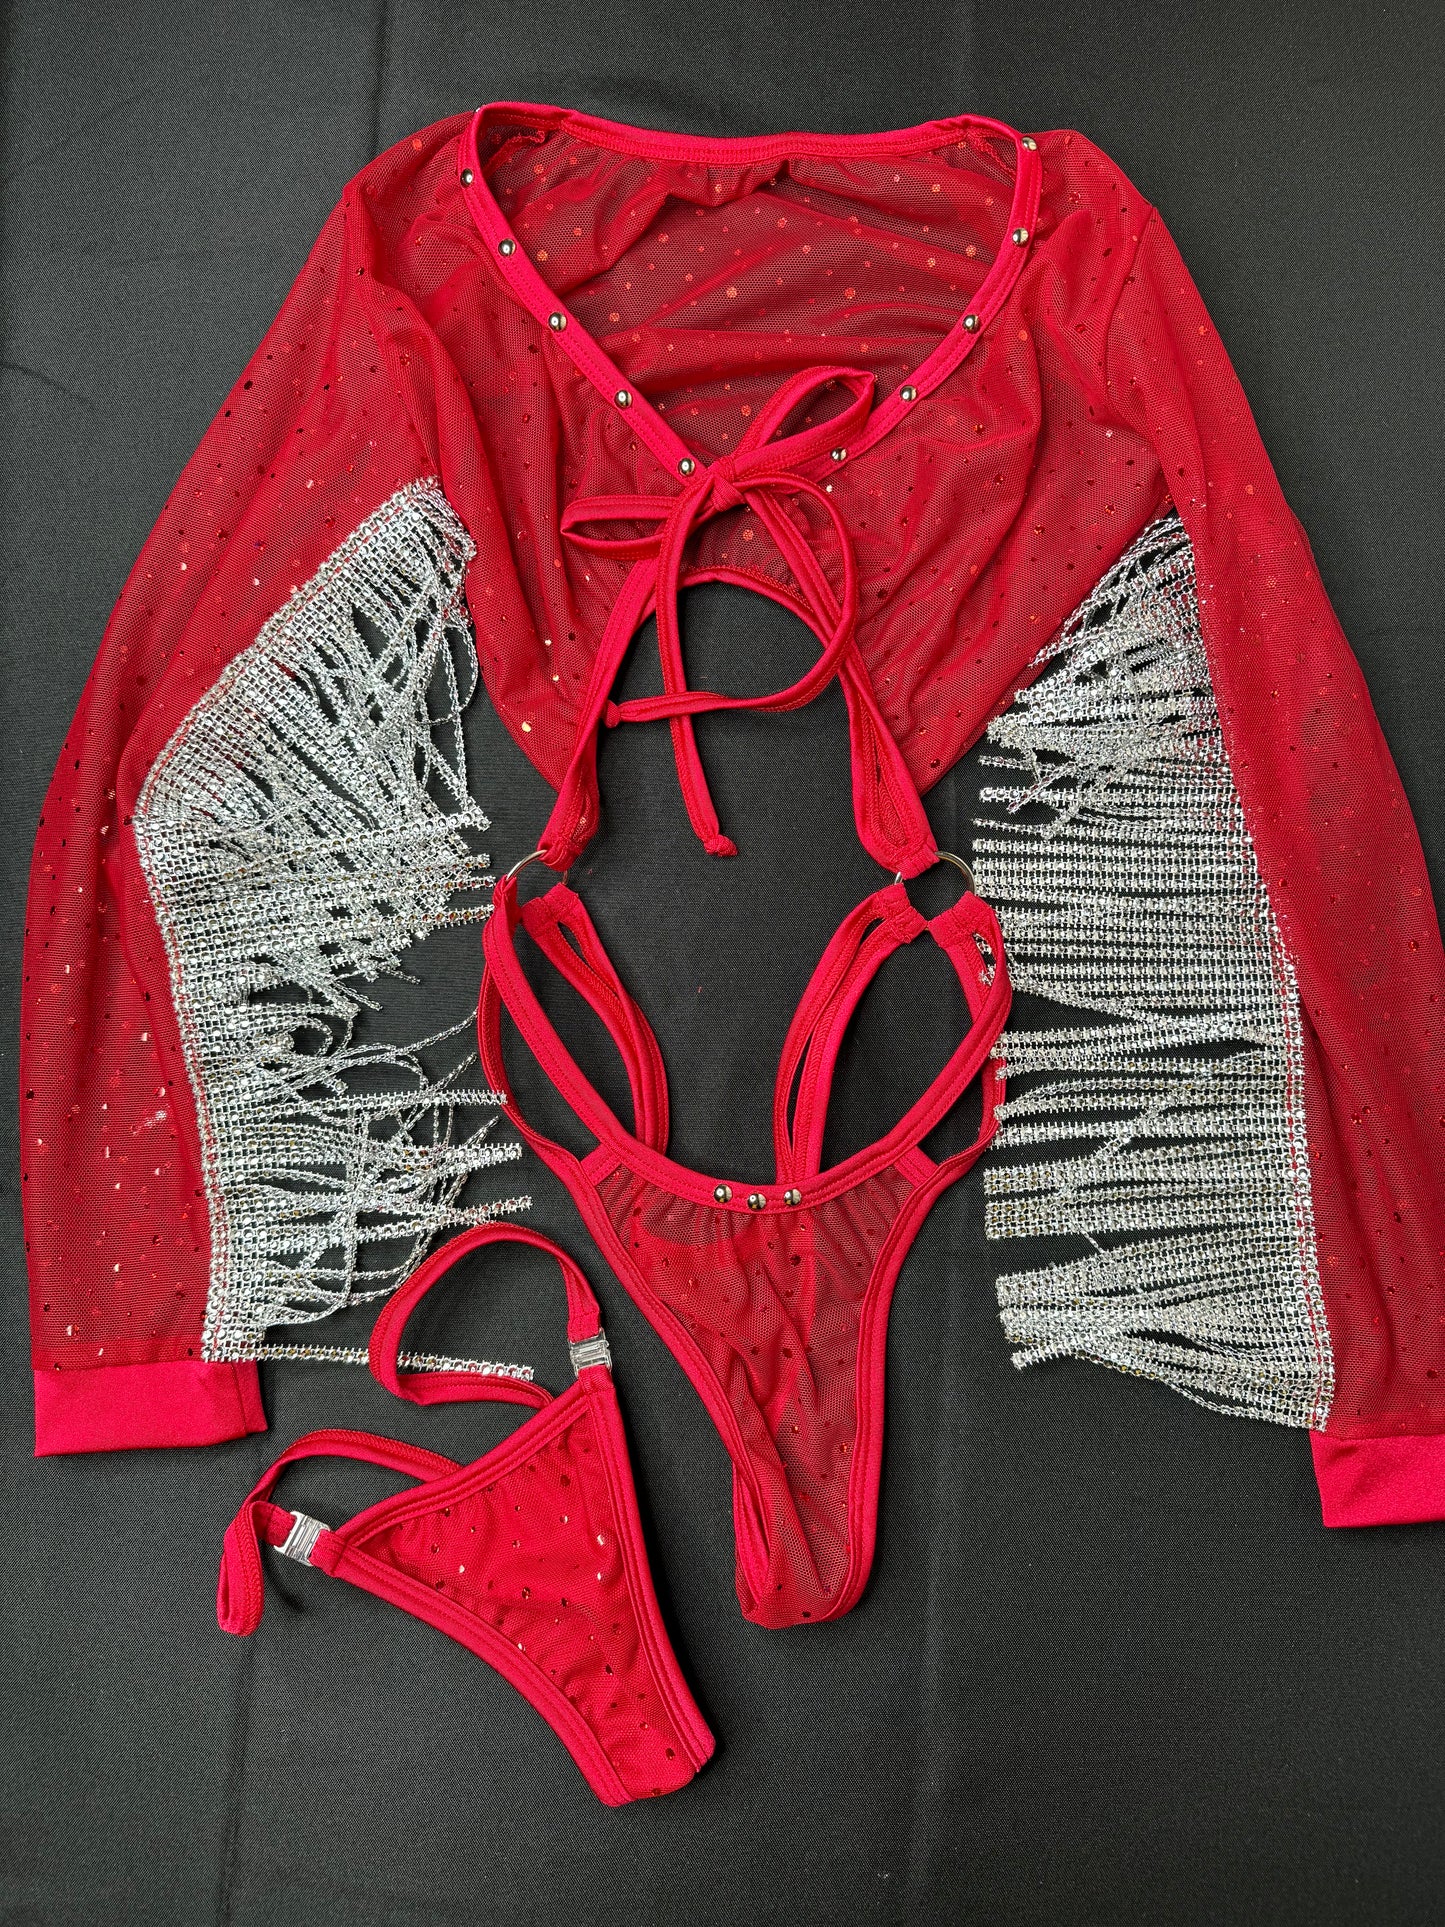 Black/Red Sparkle Mesh One-Piece Stripper Outfit